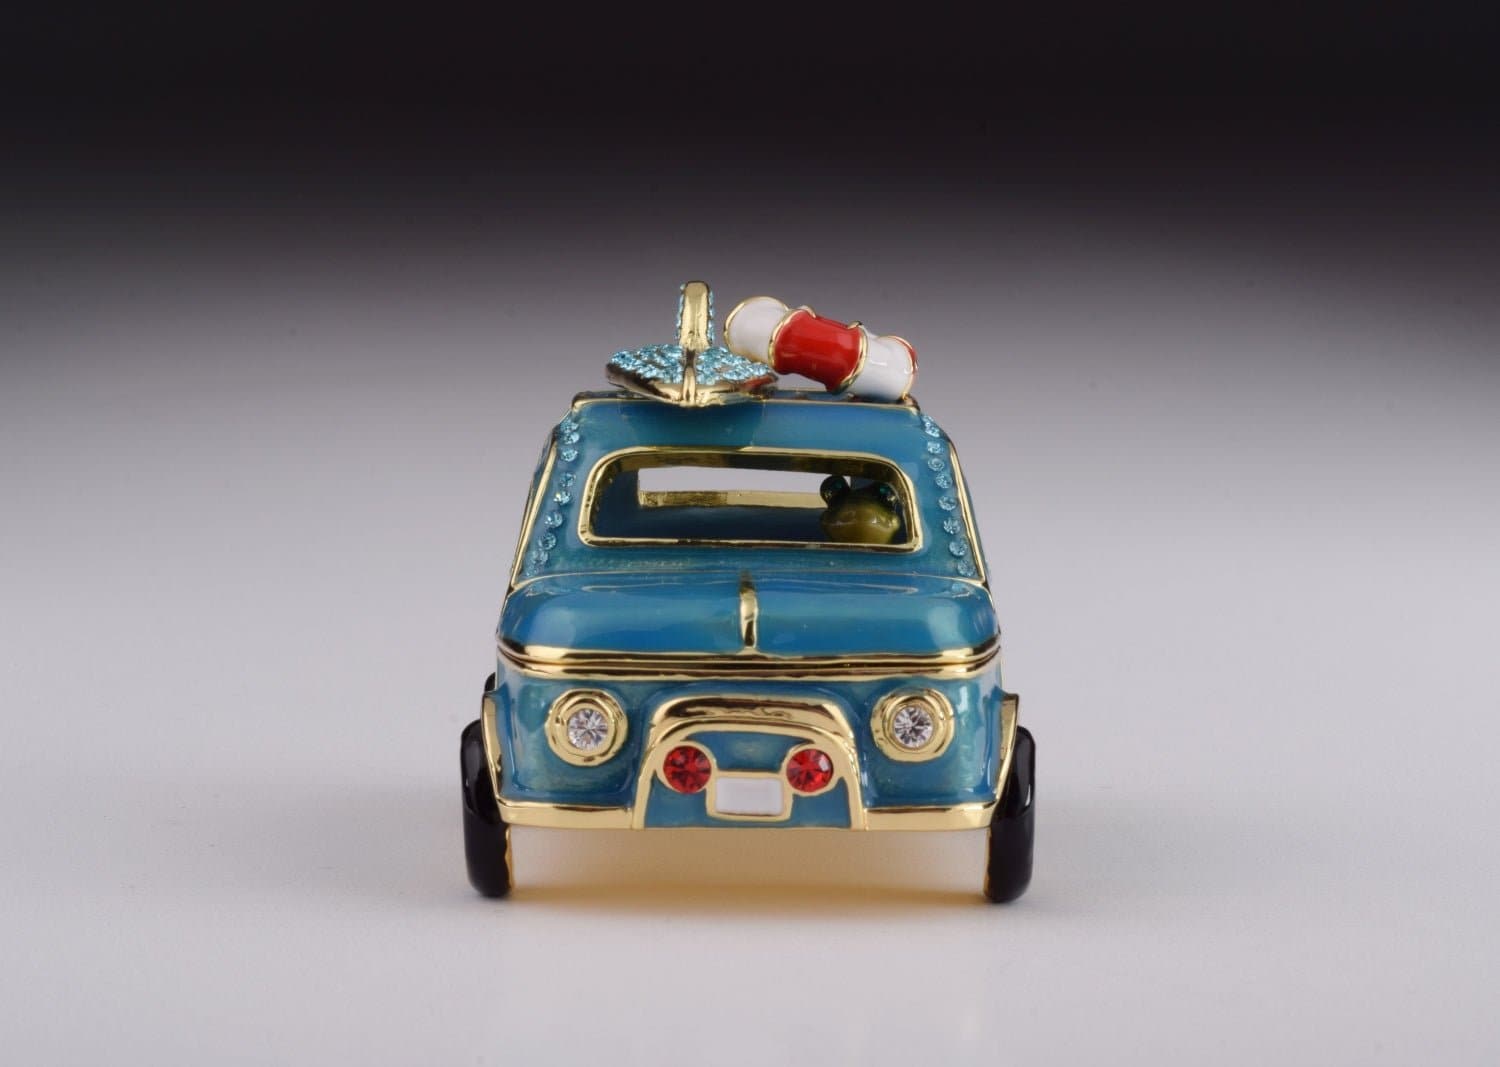 Blue Surfing Car with Surfboard - Treasures of my HeART